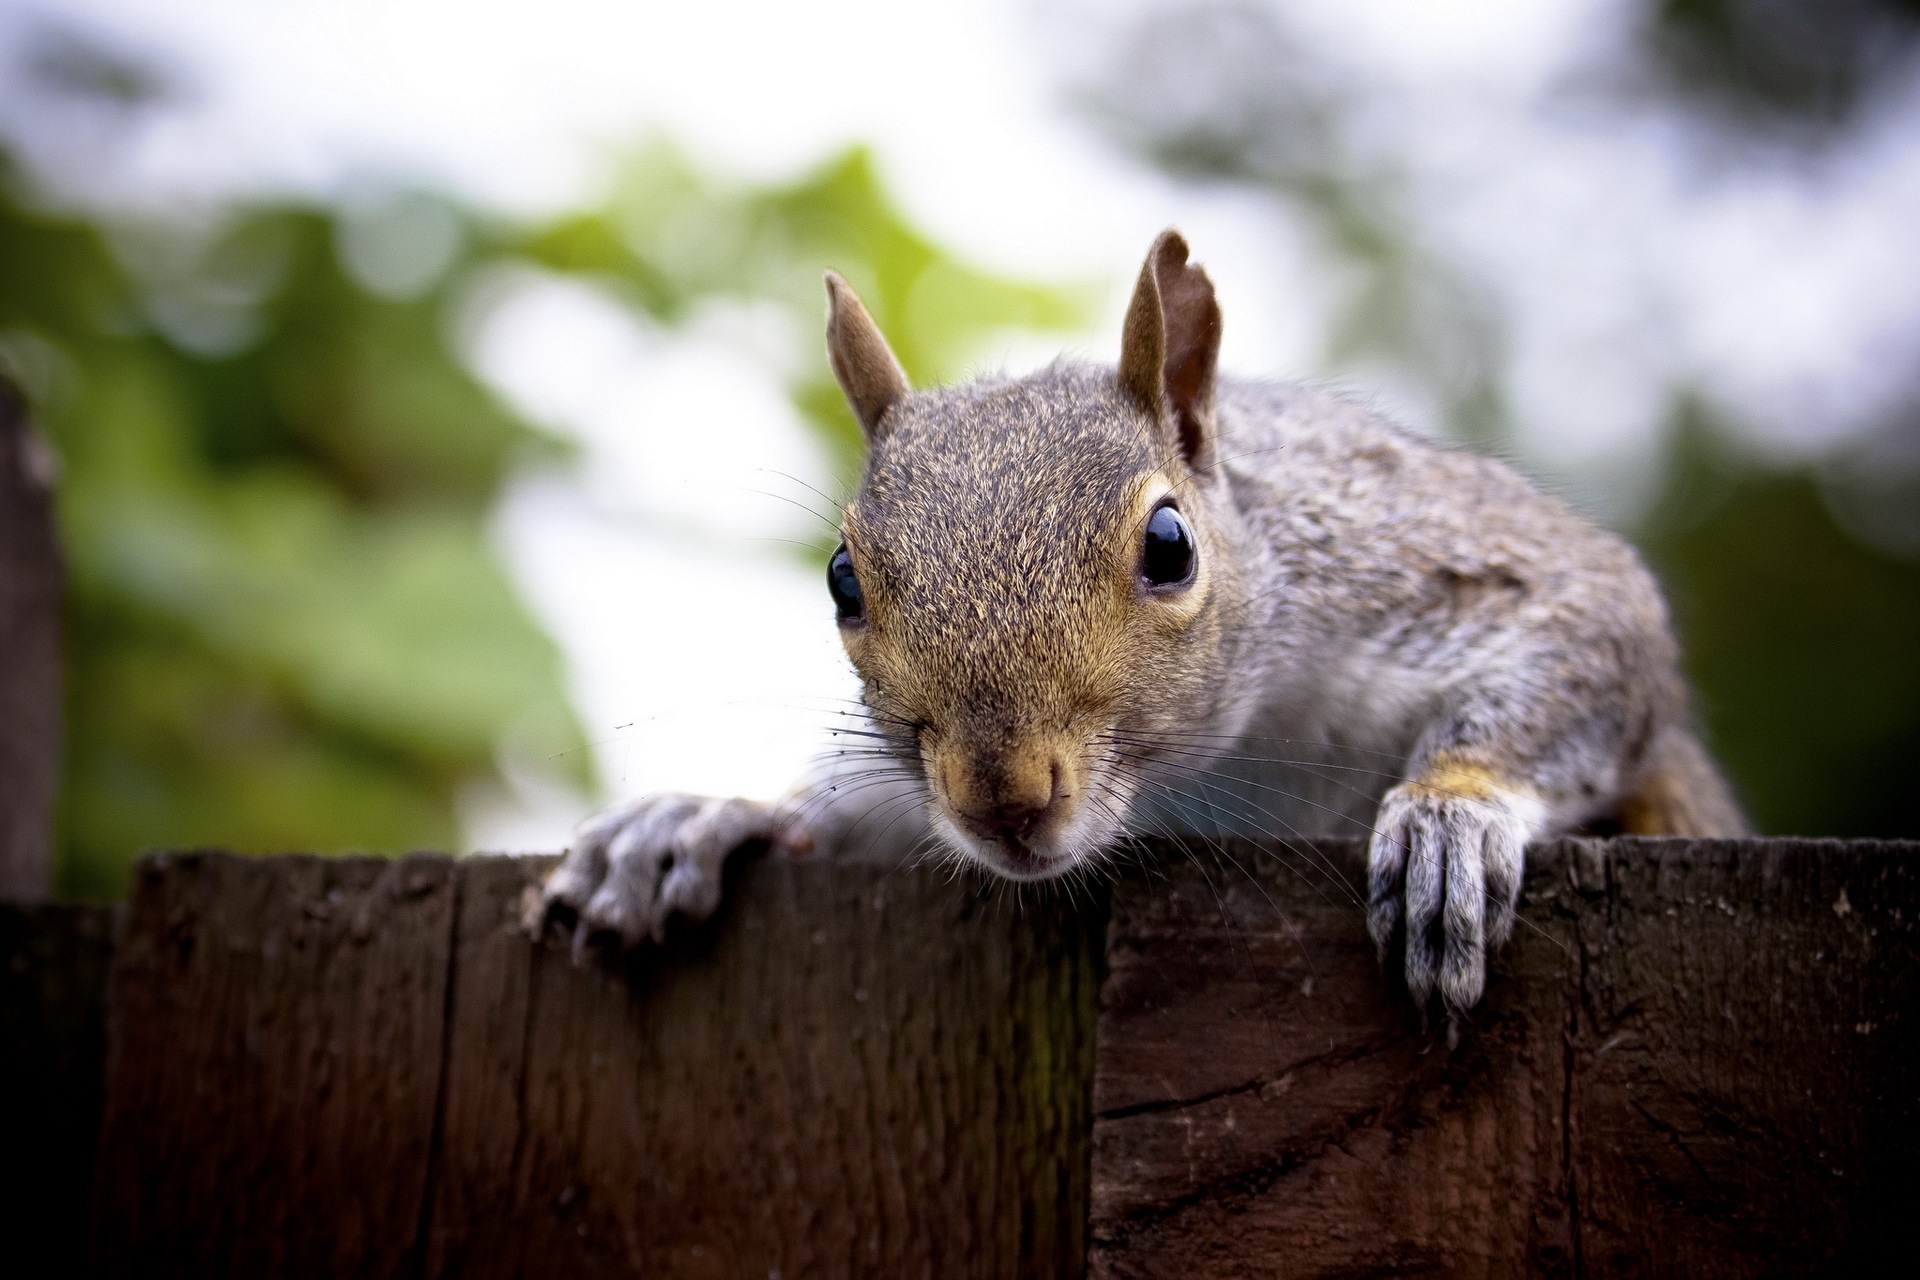 animals, squirrel, muzzle, peek out, look out wallpaper for mobile